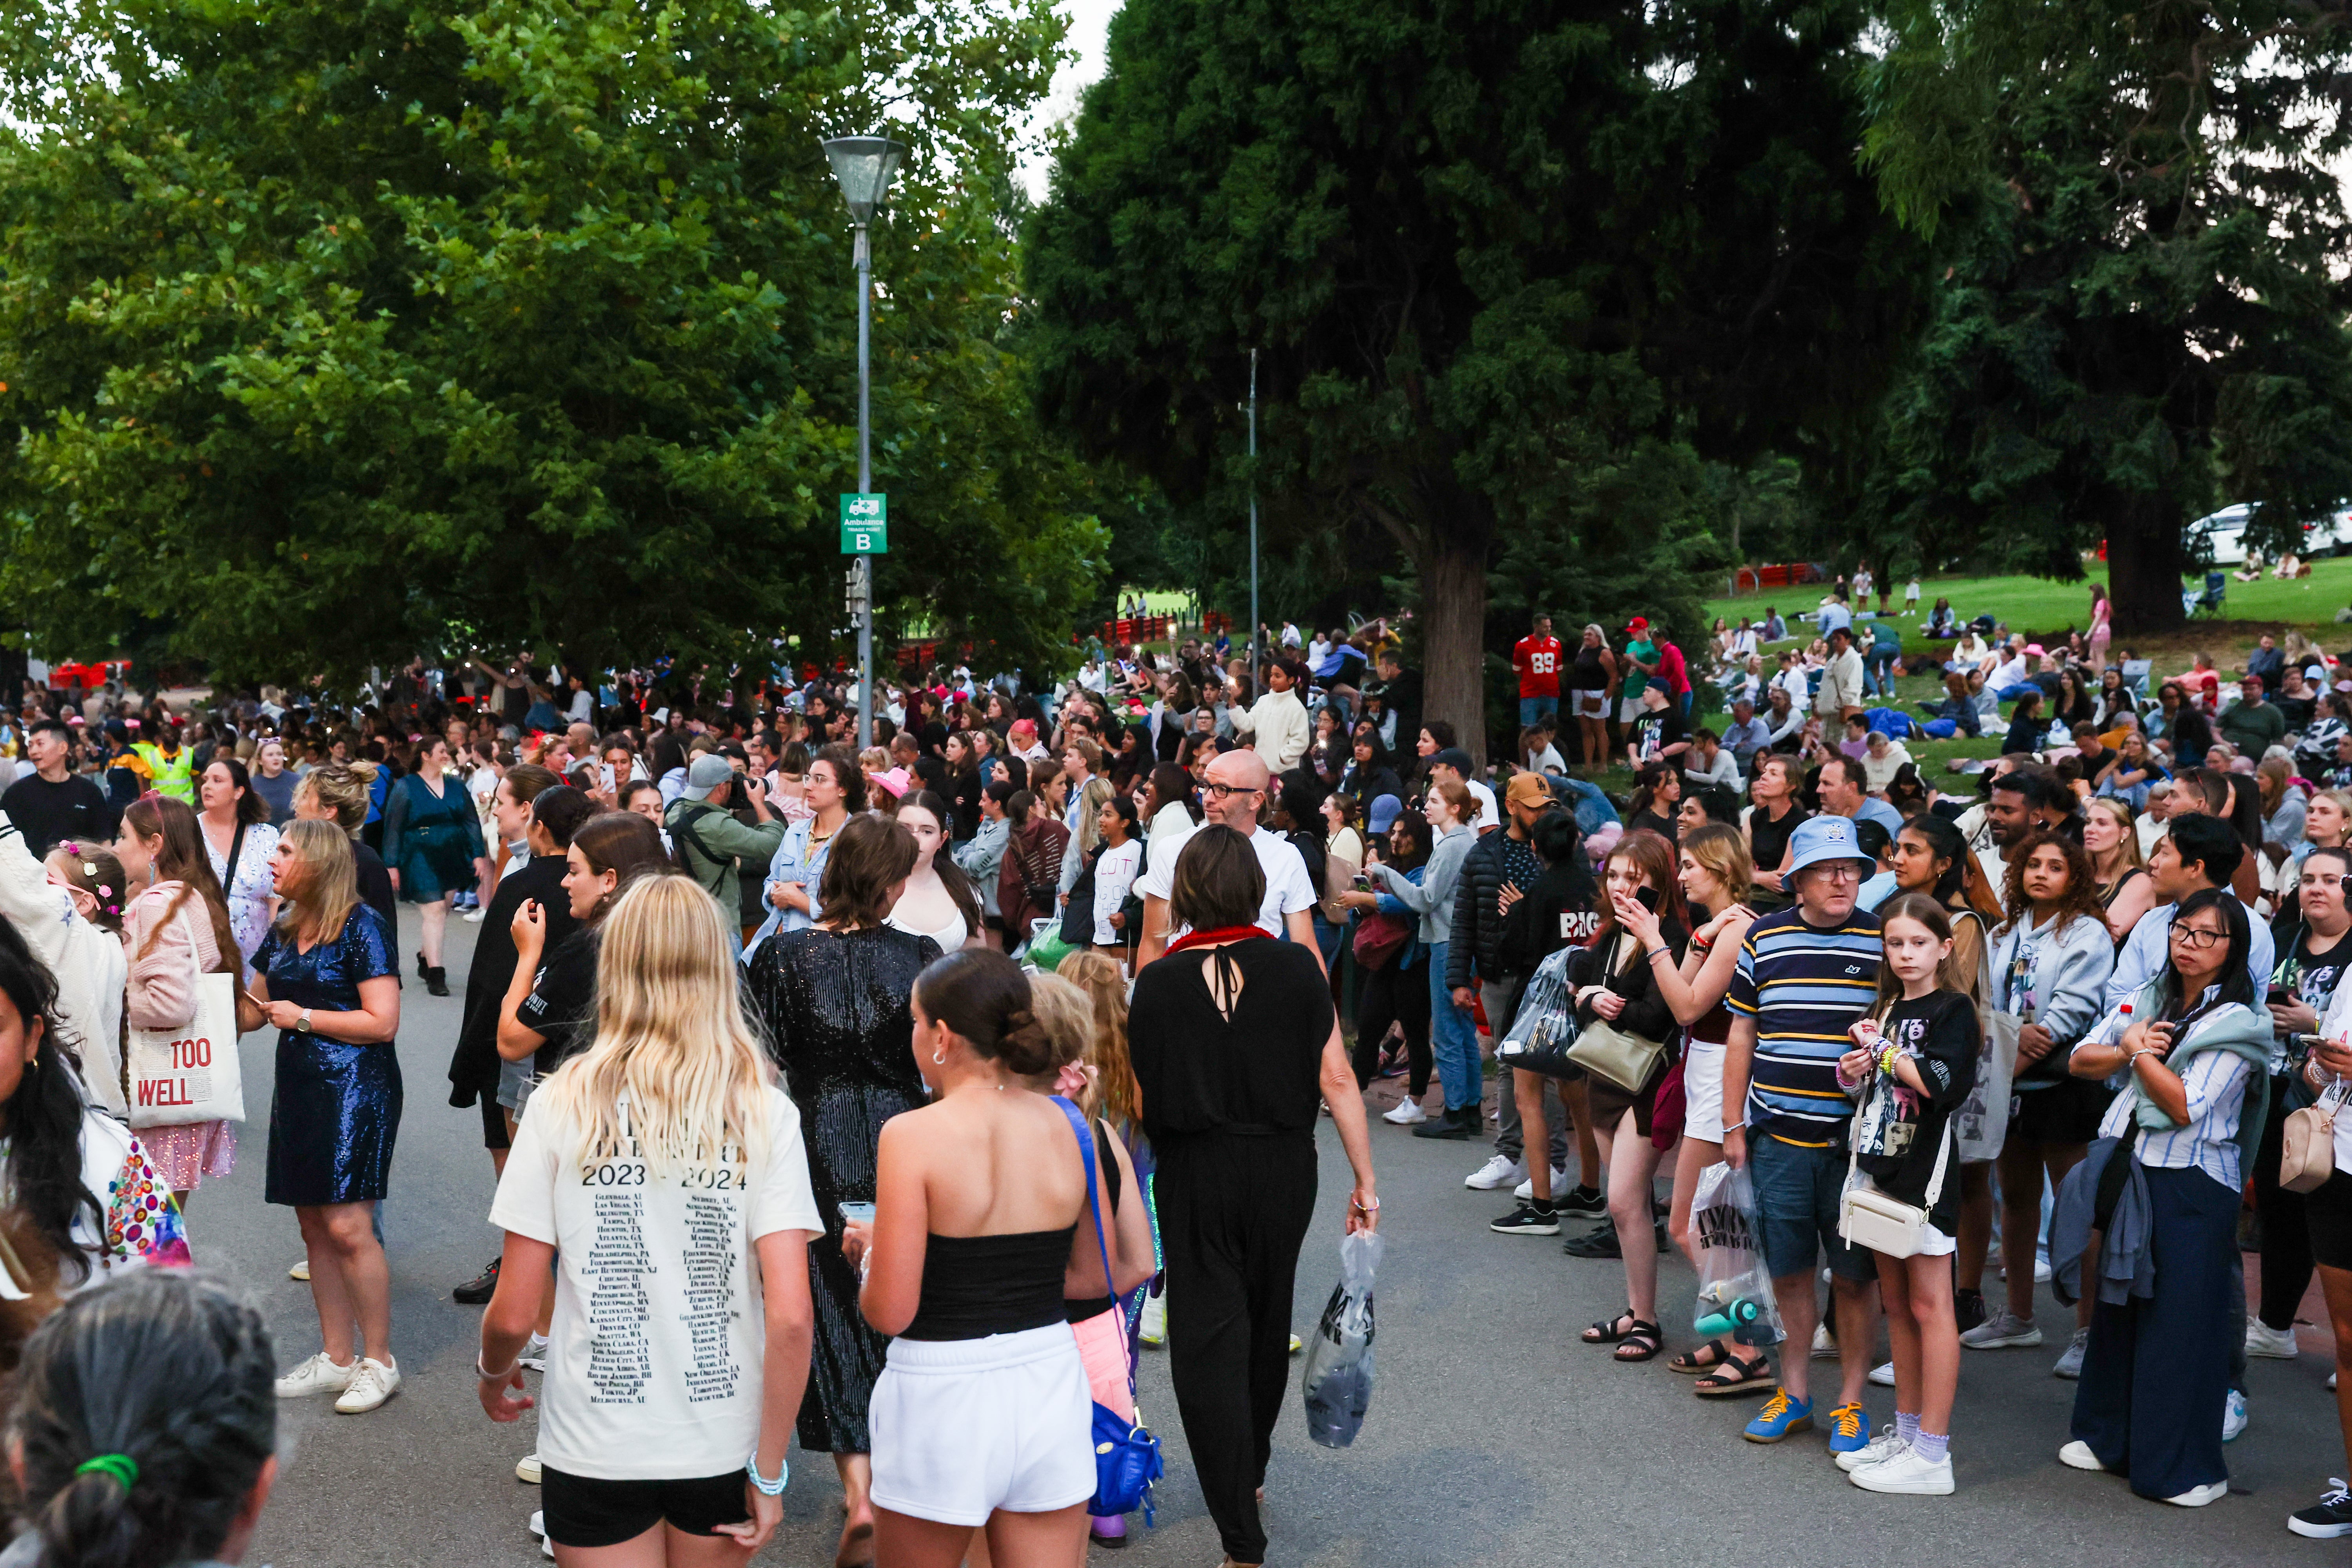 Taylor Swift fans with no tickets sing and dance during the concert outside the Melbourne Cricket Ground